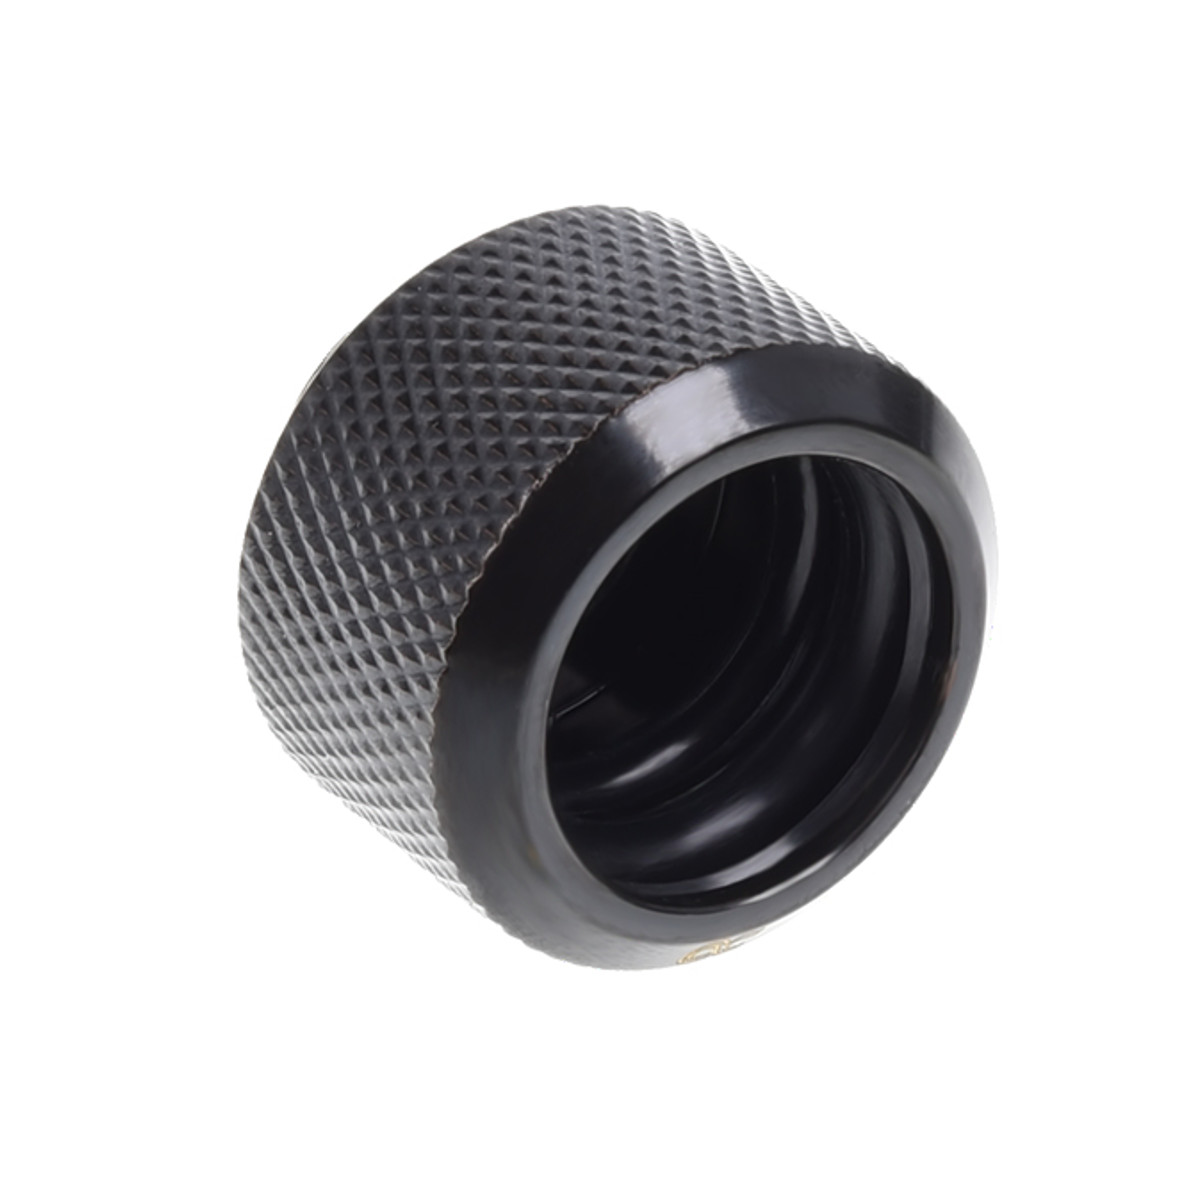 Alphacool - Alphacool Eiszapfen 16mm Deep Black Hard Tube Compression Fittings - Six Pack